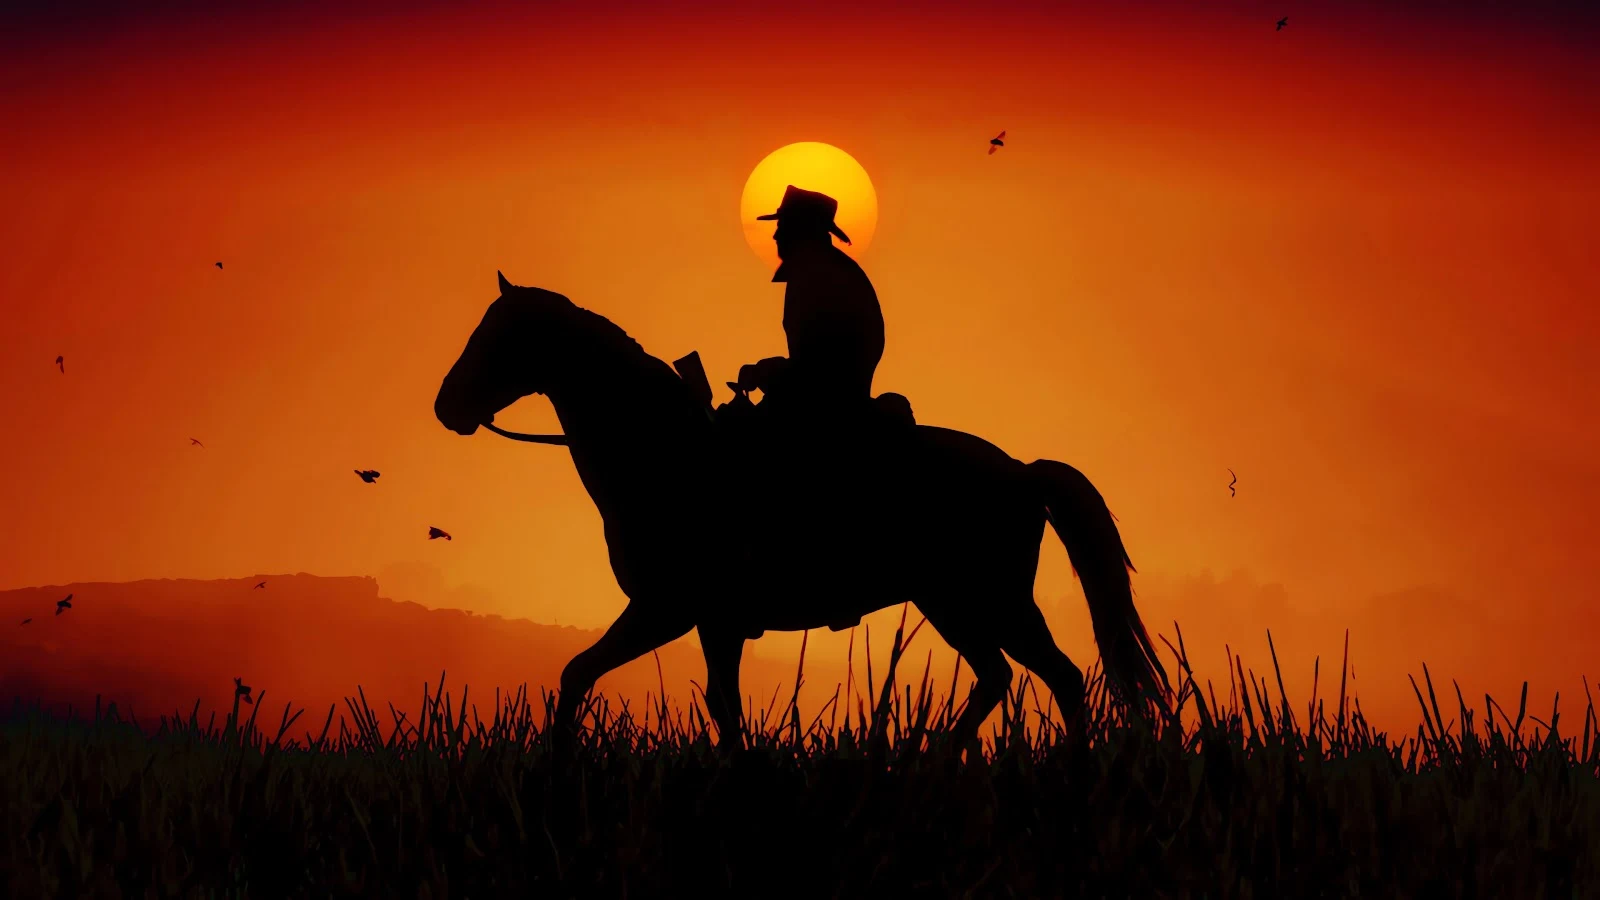 Red Dead Redemption 2 Sunset Wallpaper 4K for PC - Majestic and Serene